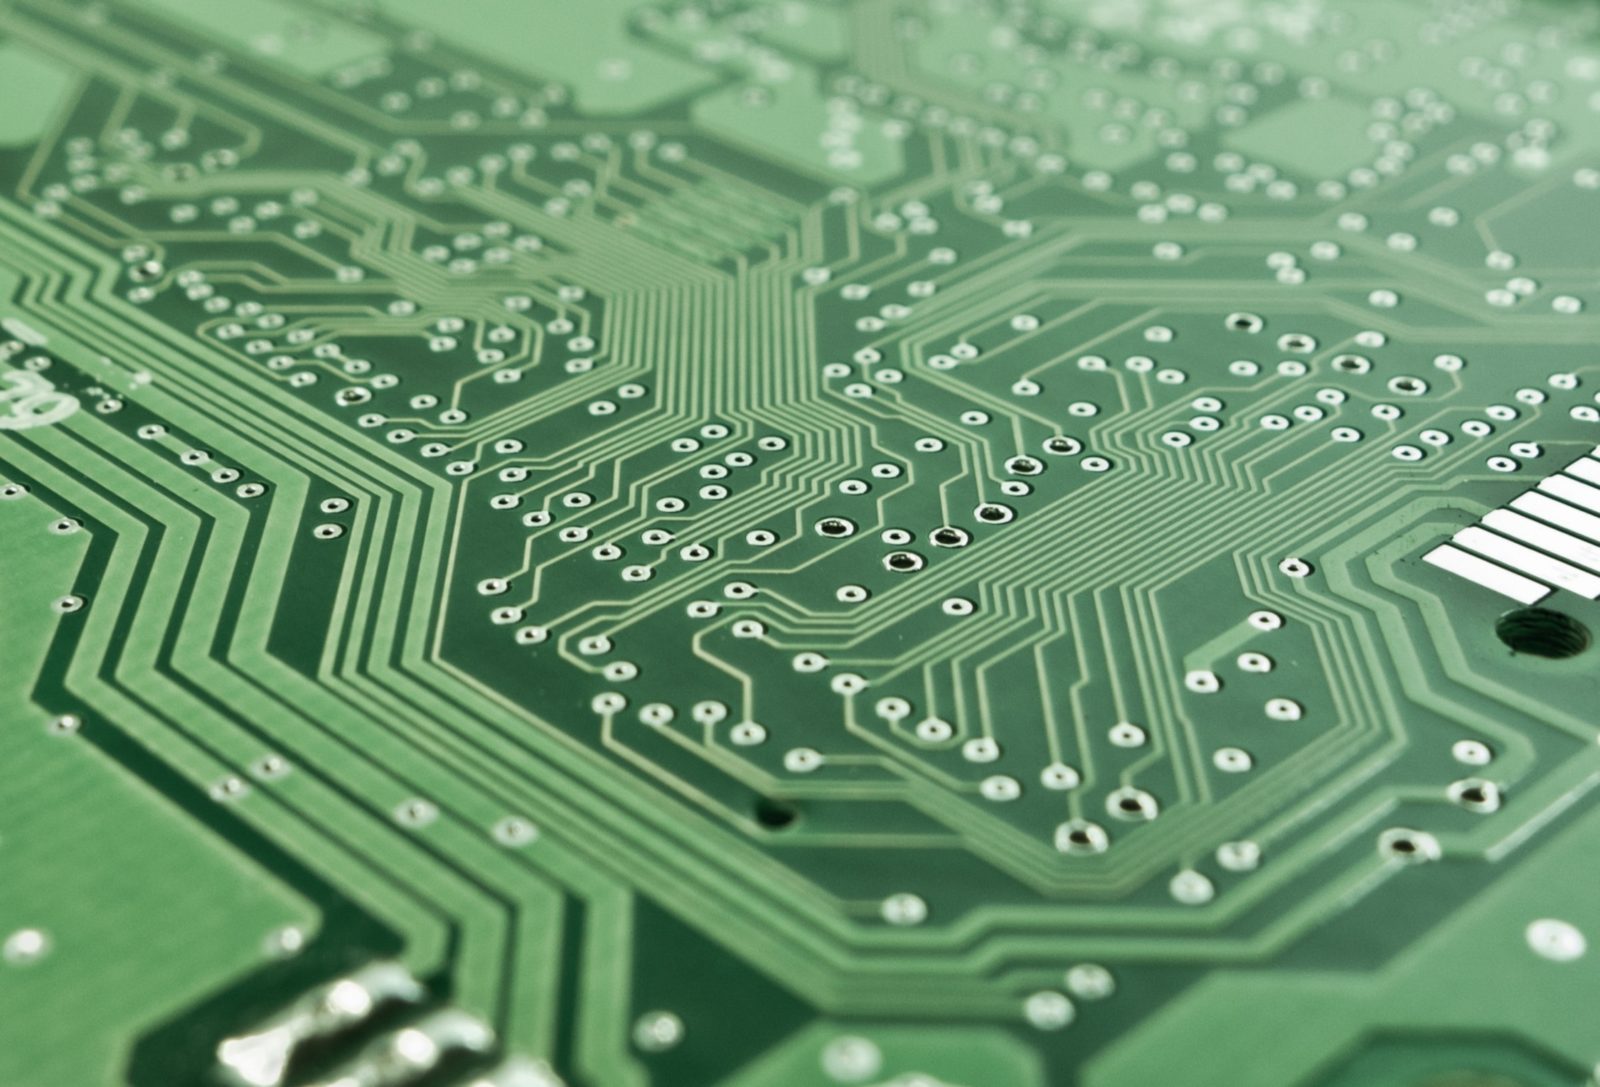 Close-up view of a computer circuit board